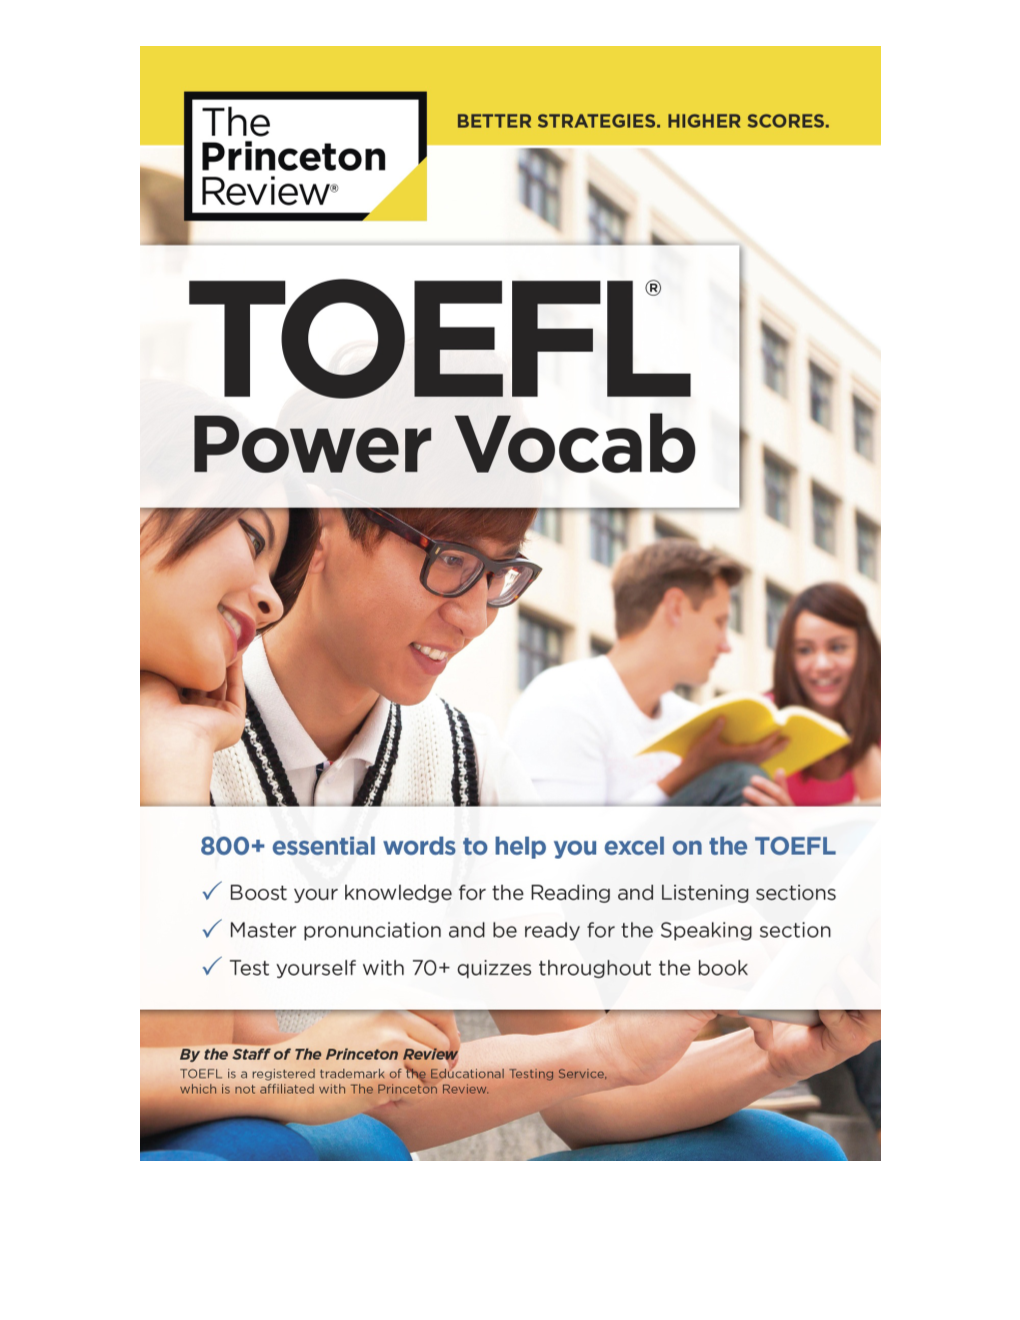 TOEFL Power Vocab Contains Terms and Quizzes to Help You Learn and Remember Frequently Tested Words So You Can Optimize Your Score